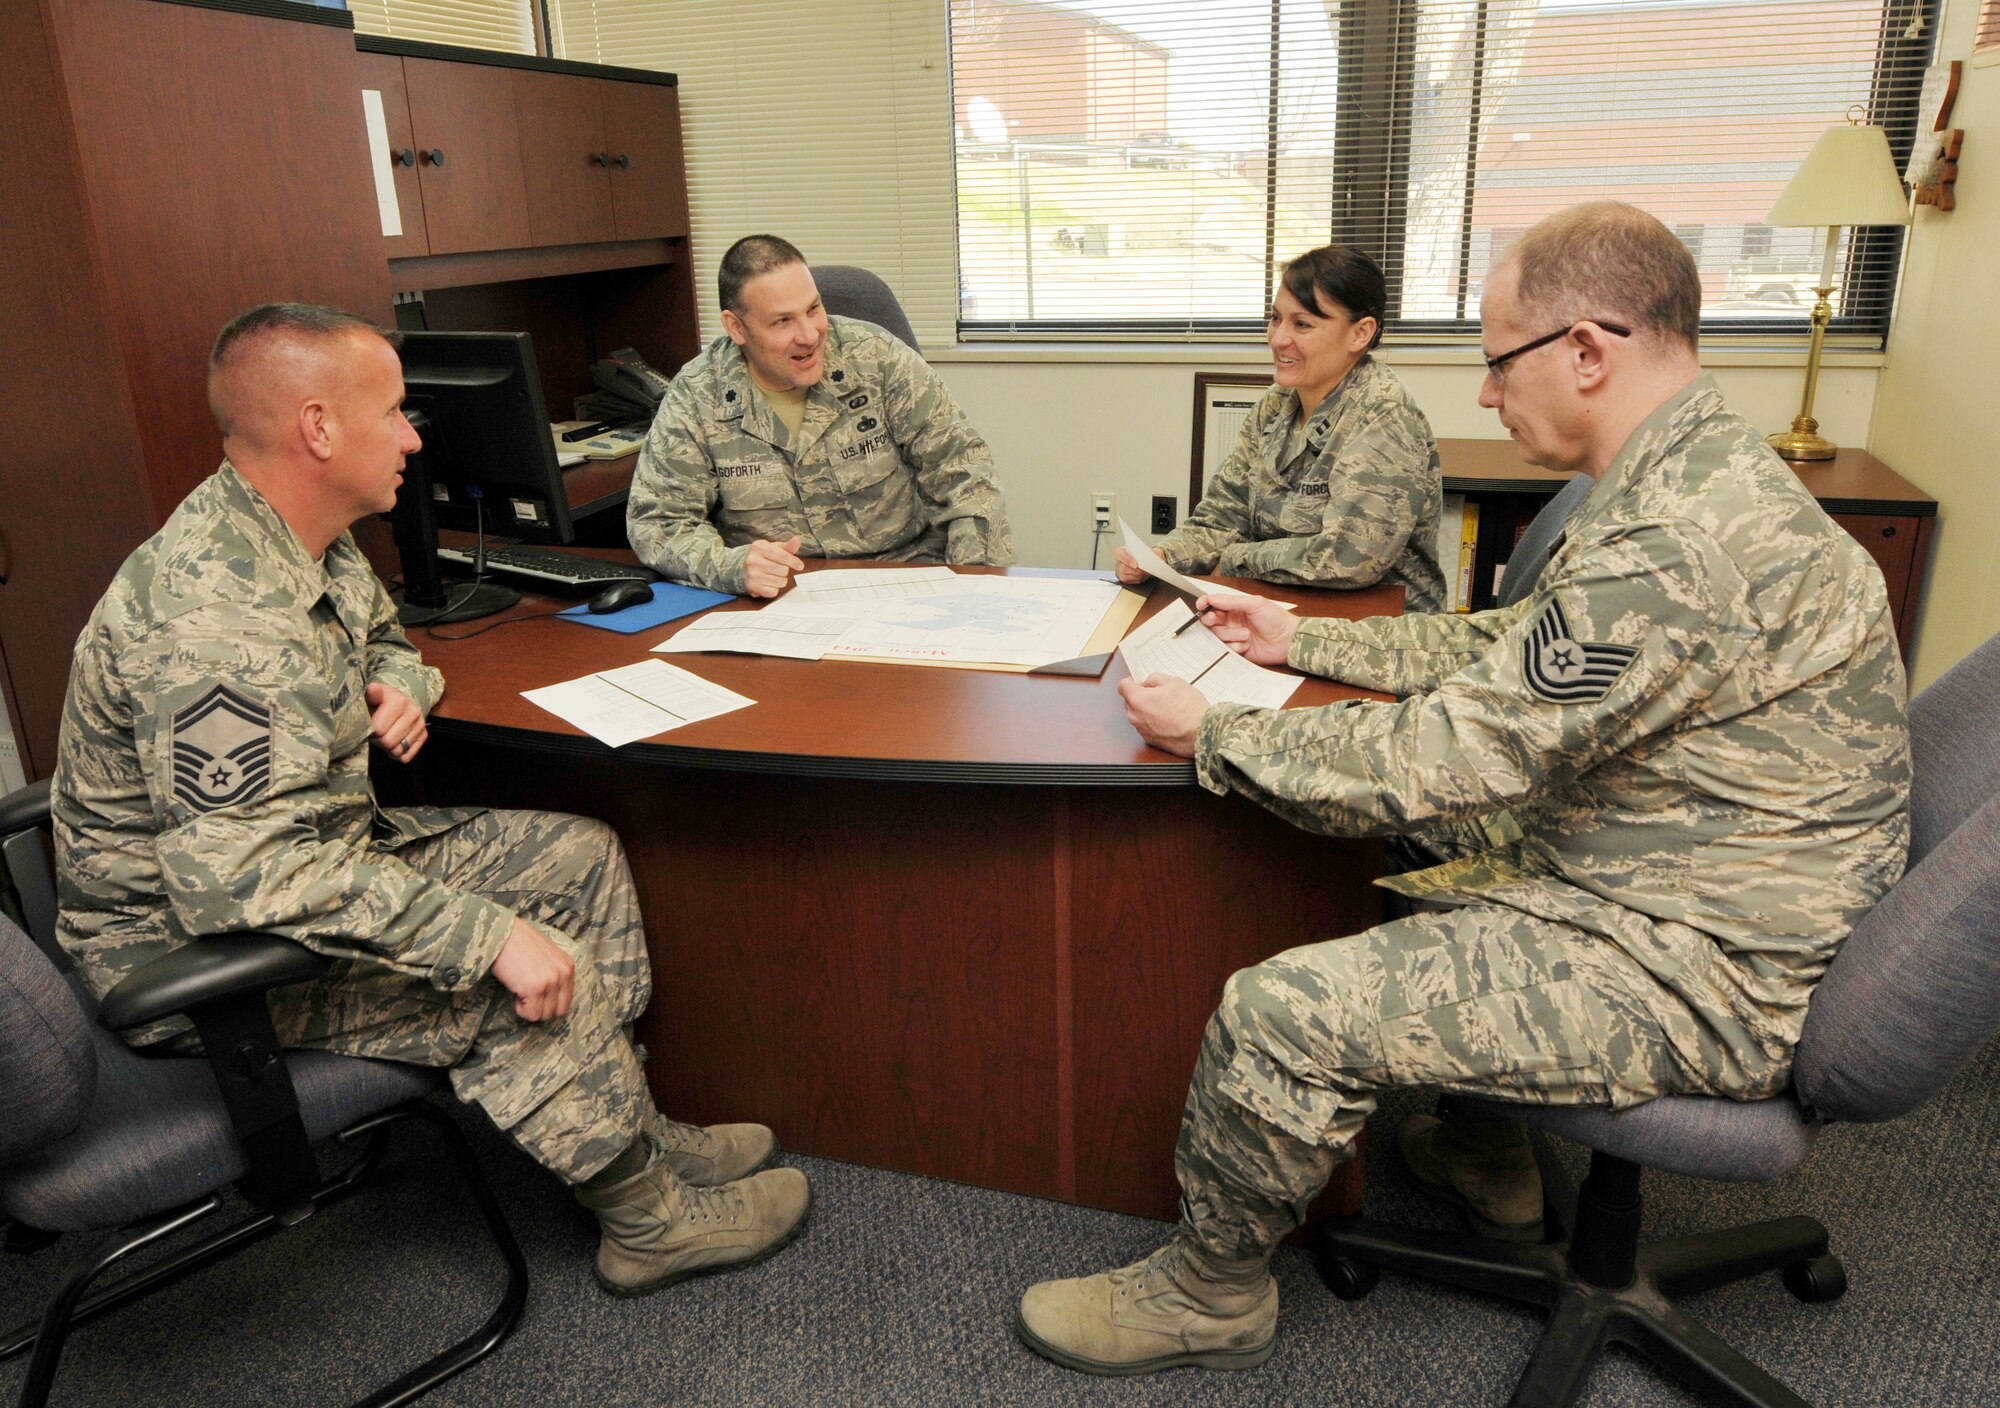 U.S. Air Force Senior Master Sgt. Christopher Amburn, 145th Base Contracting Officer, looks over Innovative Readiness Training financial reports with Commander, Lt. Col. Gregory Goforth, Capt. Jeanie Helms and Tech. Sgt. Joel Greene, 145th Comptroller Flight at the North Carolina Air National Guard base, Charlotte Douglas Intl. airport, March 10, 2014. IRT is a Department of Defense program that provides U.S. military professionals’ invaluable training as well as provides support to underserved communities. In the past year, 145th CF, working with SMSgt Amburn has managed over $2.6 Million DoD funds for ANG, Air Force Reserve, Marines, Navy, and ARMY IRT missions. (U.S. Air National Guard photo by Master Sgt. Patricia F. Moran, 145th Public Affairs/Released)